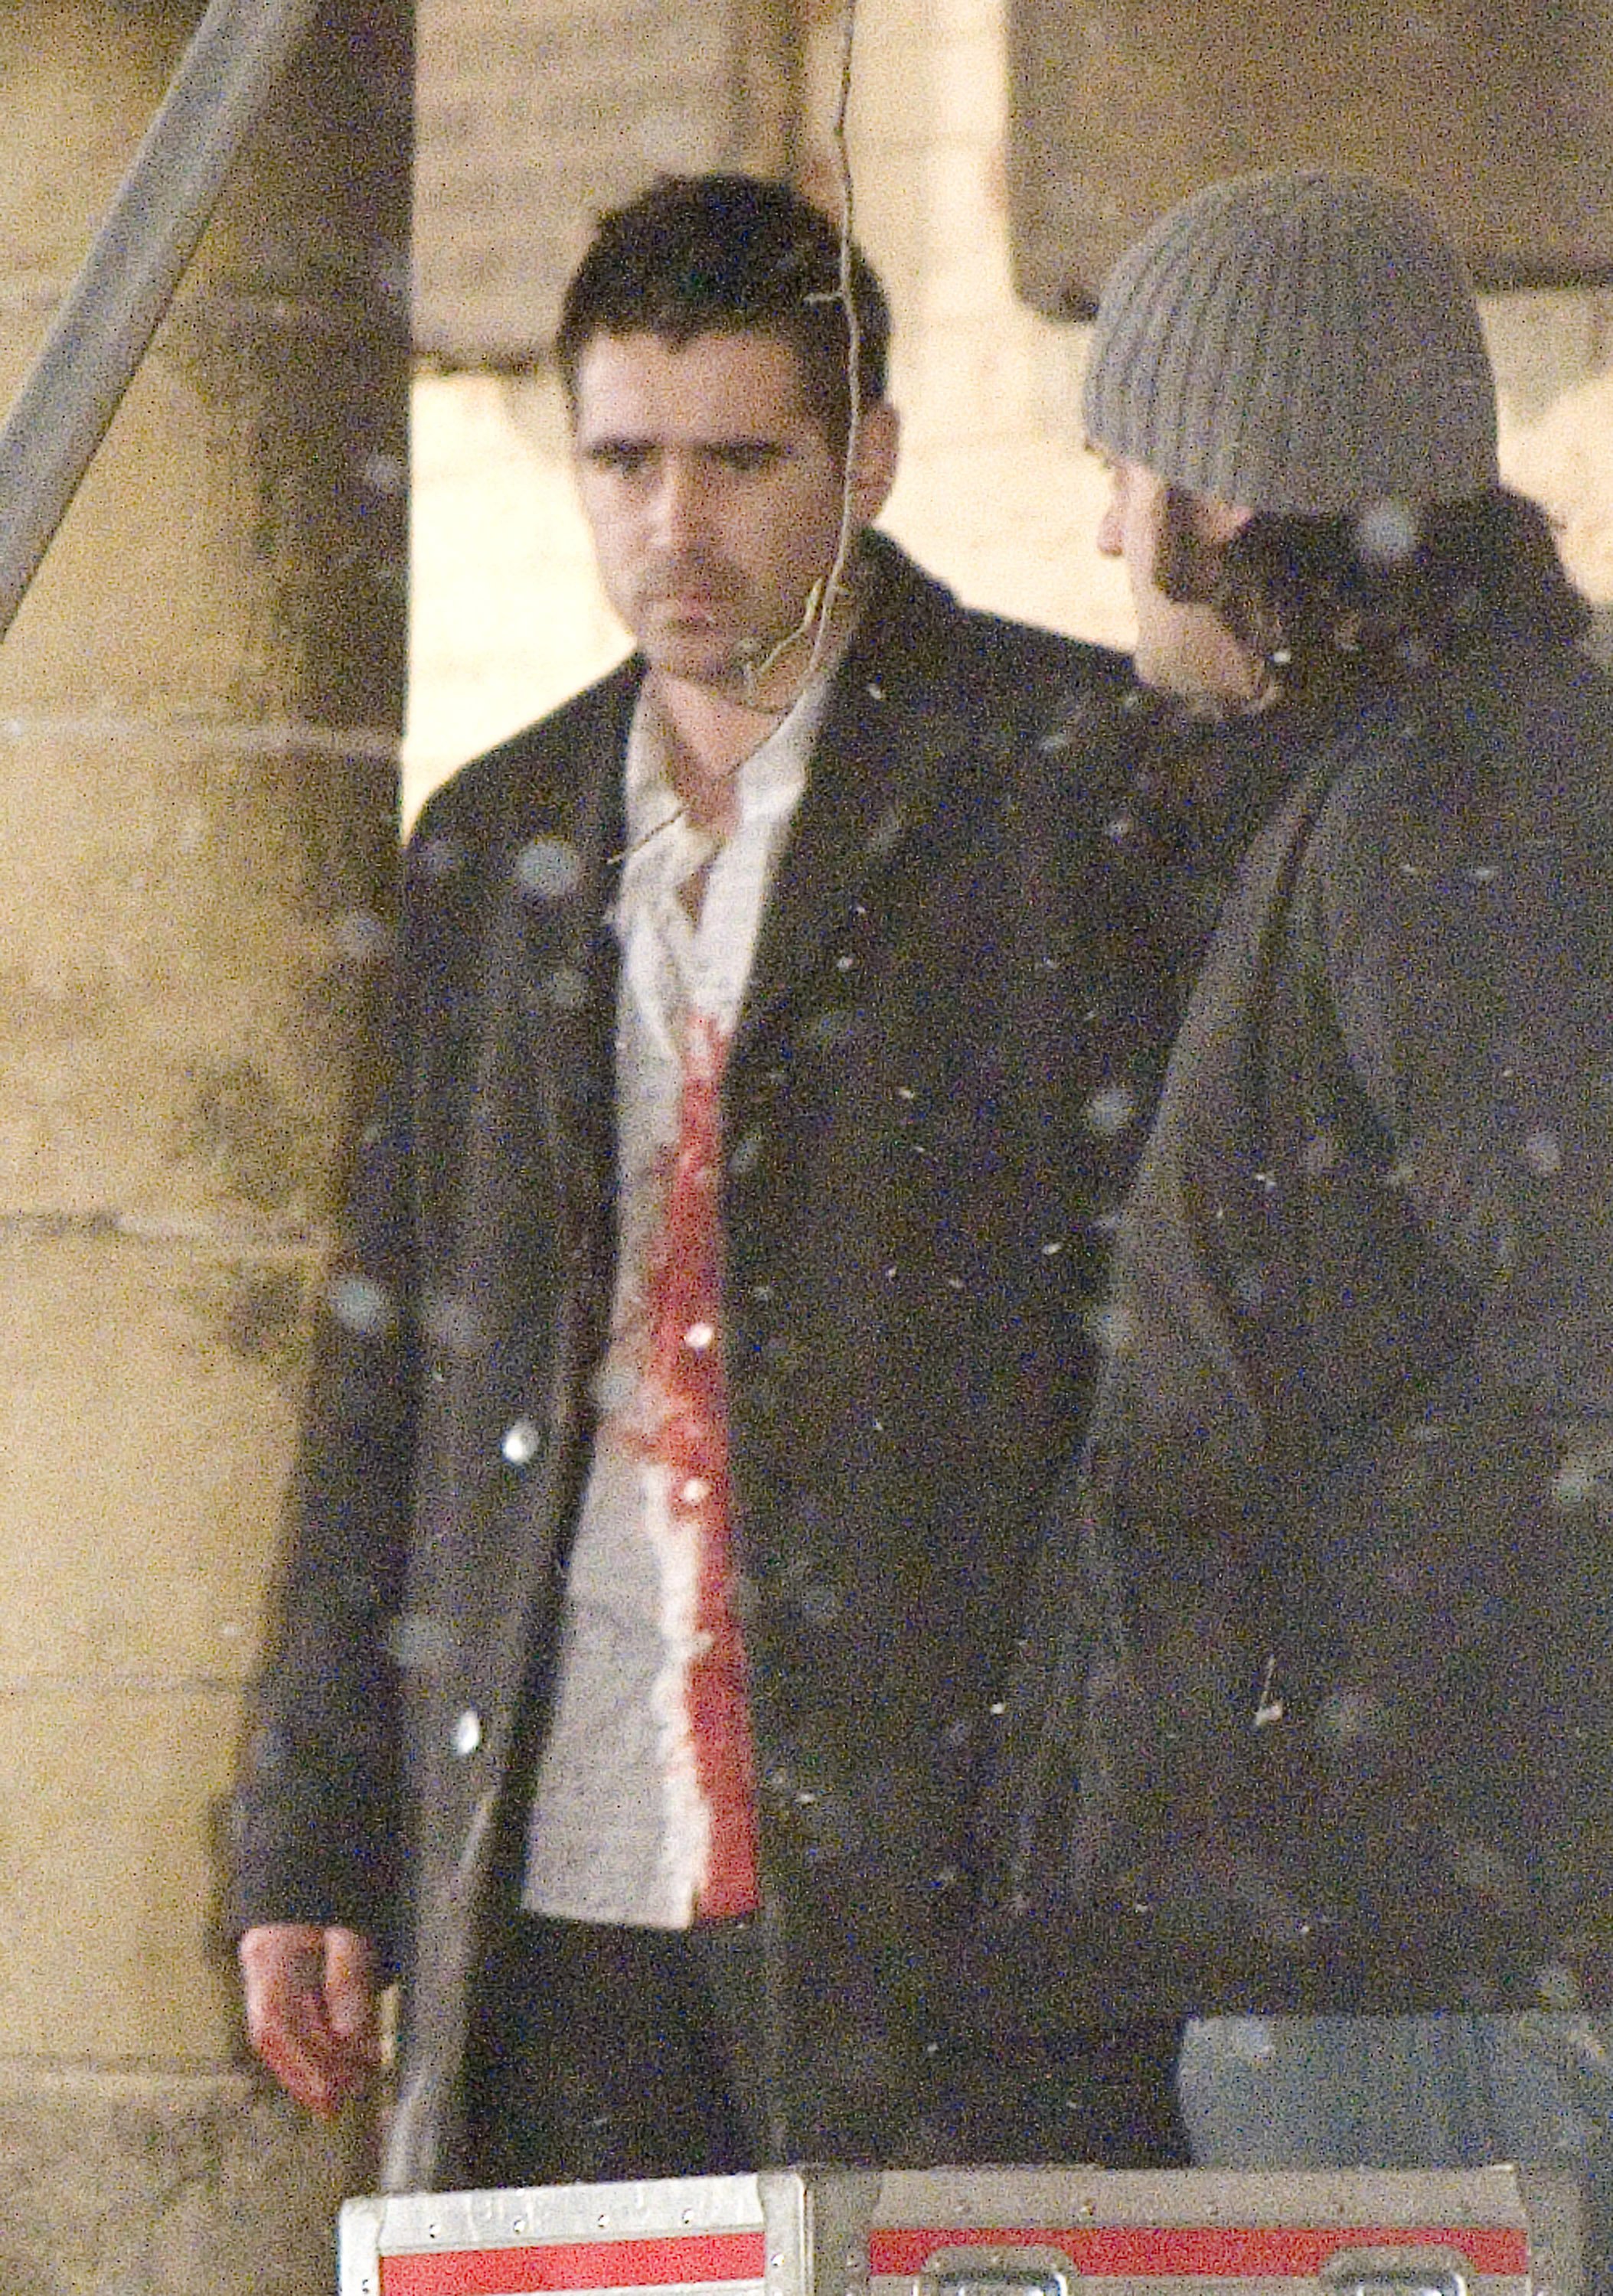 Colin Farrell and Ralph Fiennes on location for "In Bruges" on February 14, 2006 in Bruges, Belgium | Source: Jacques Moineau/FilmMagic